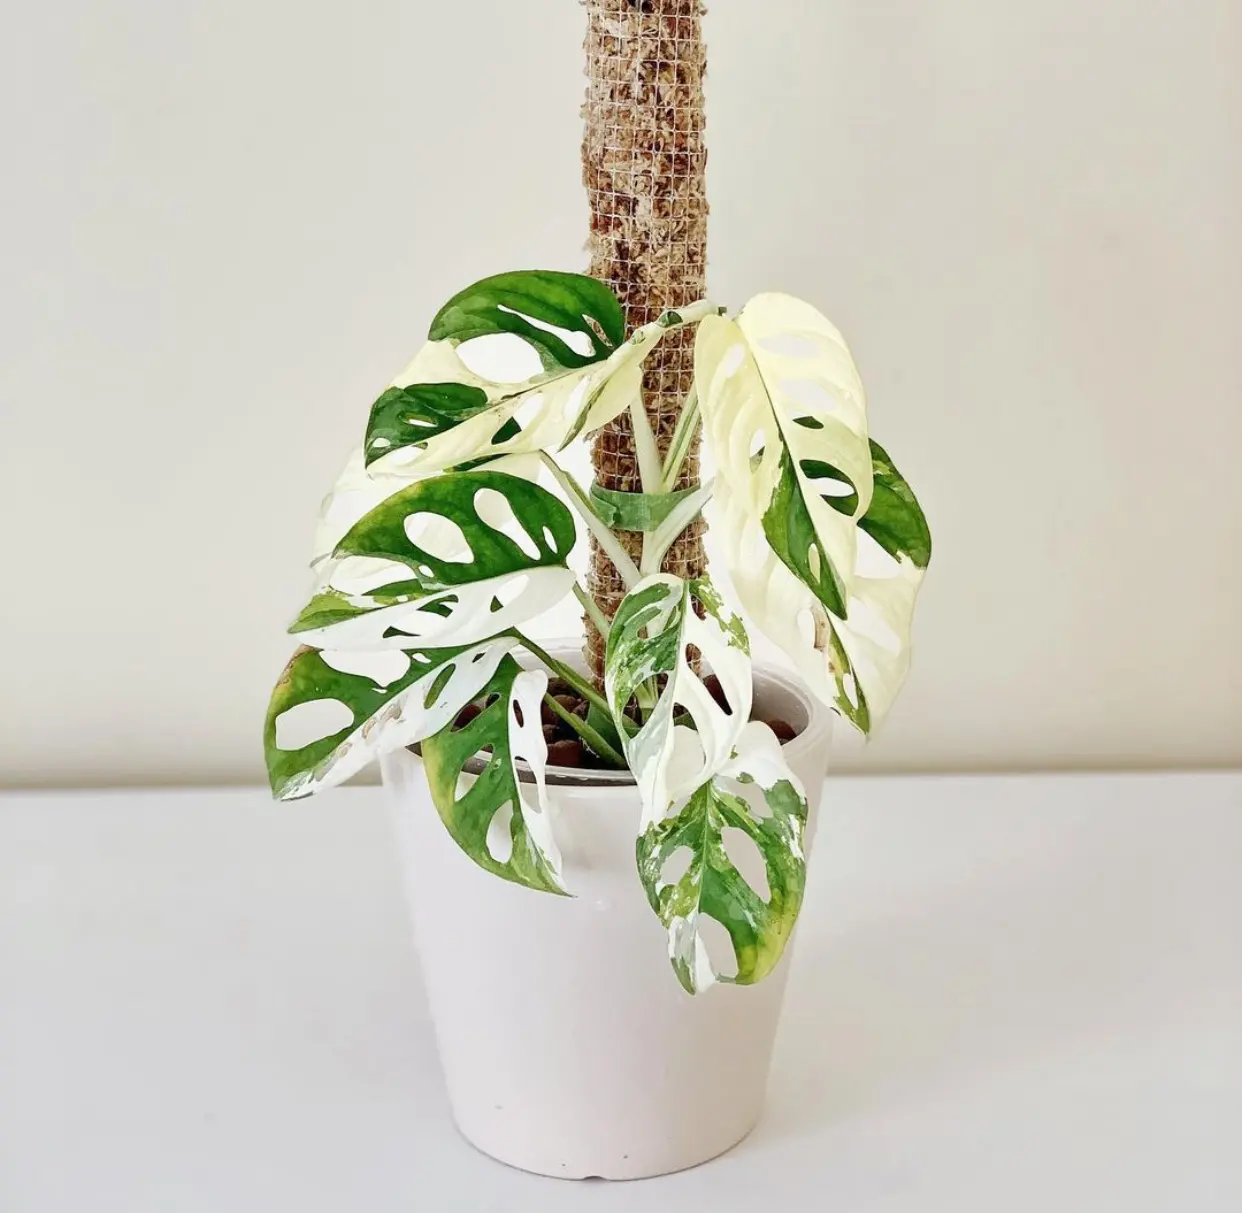 Variegated Monstera Adansonii Plant Care Tips - The Jungle Collective